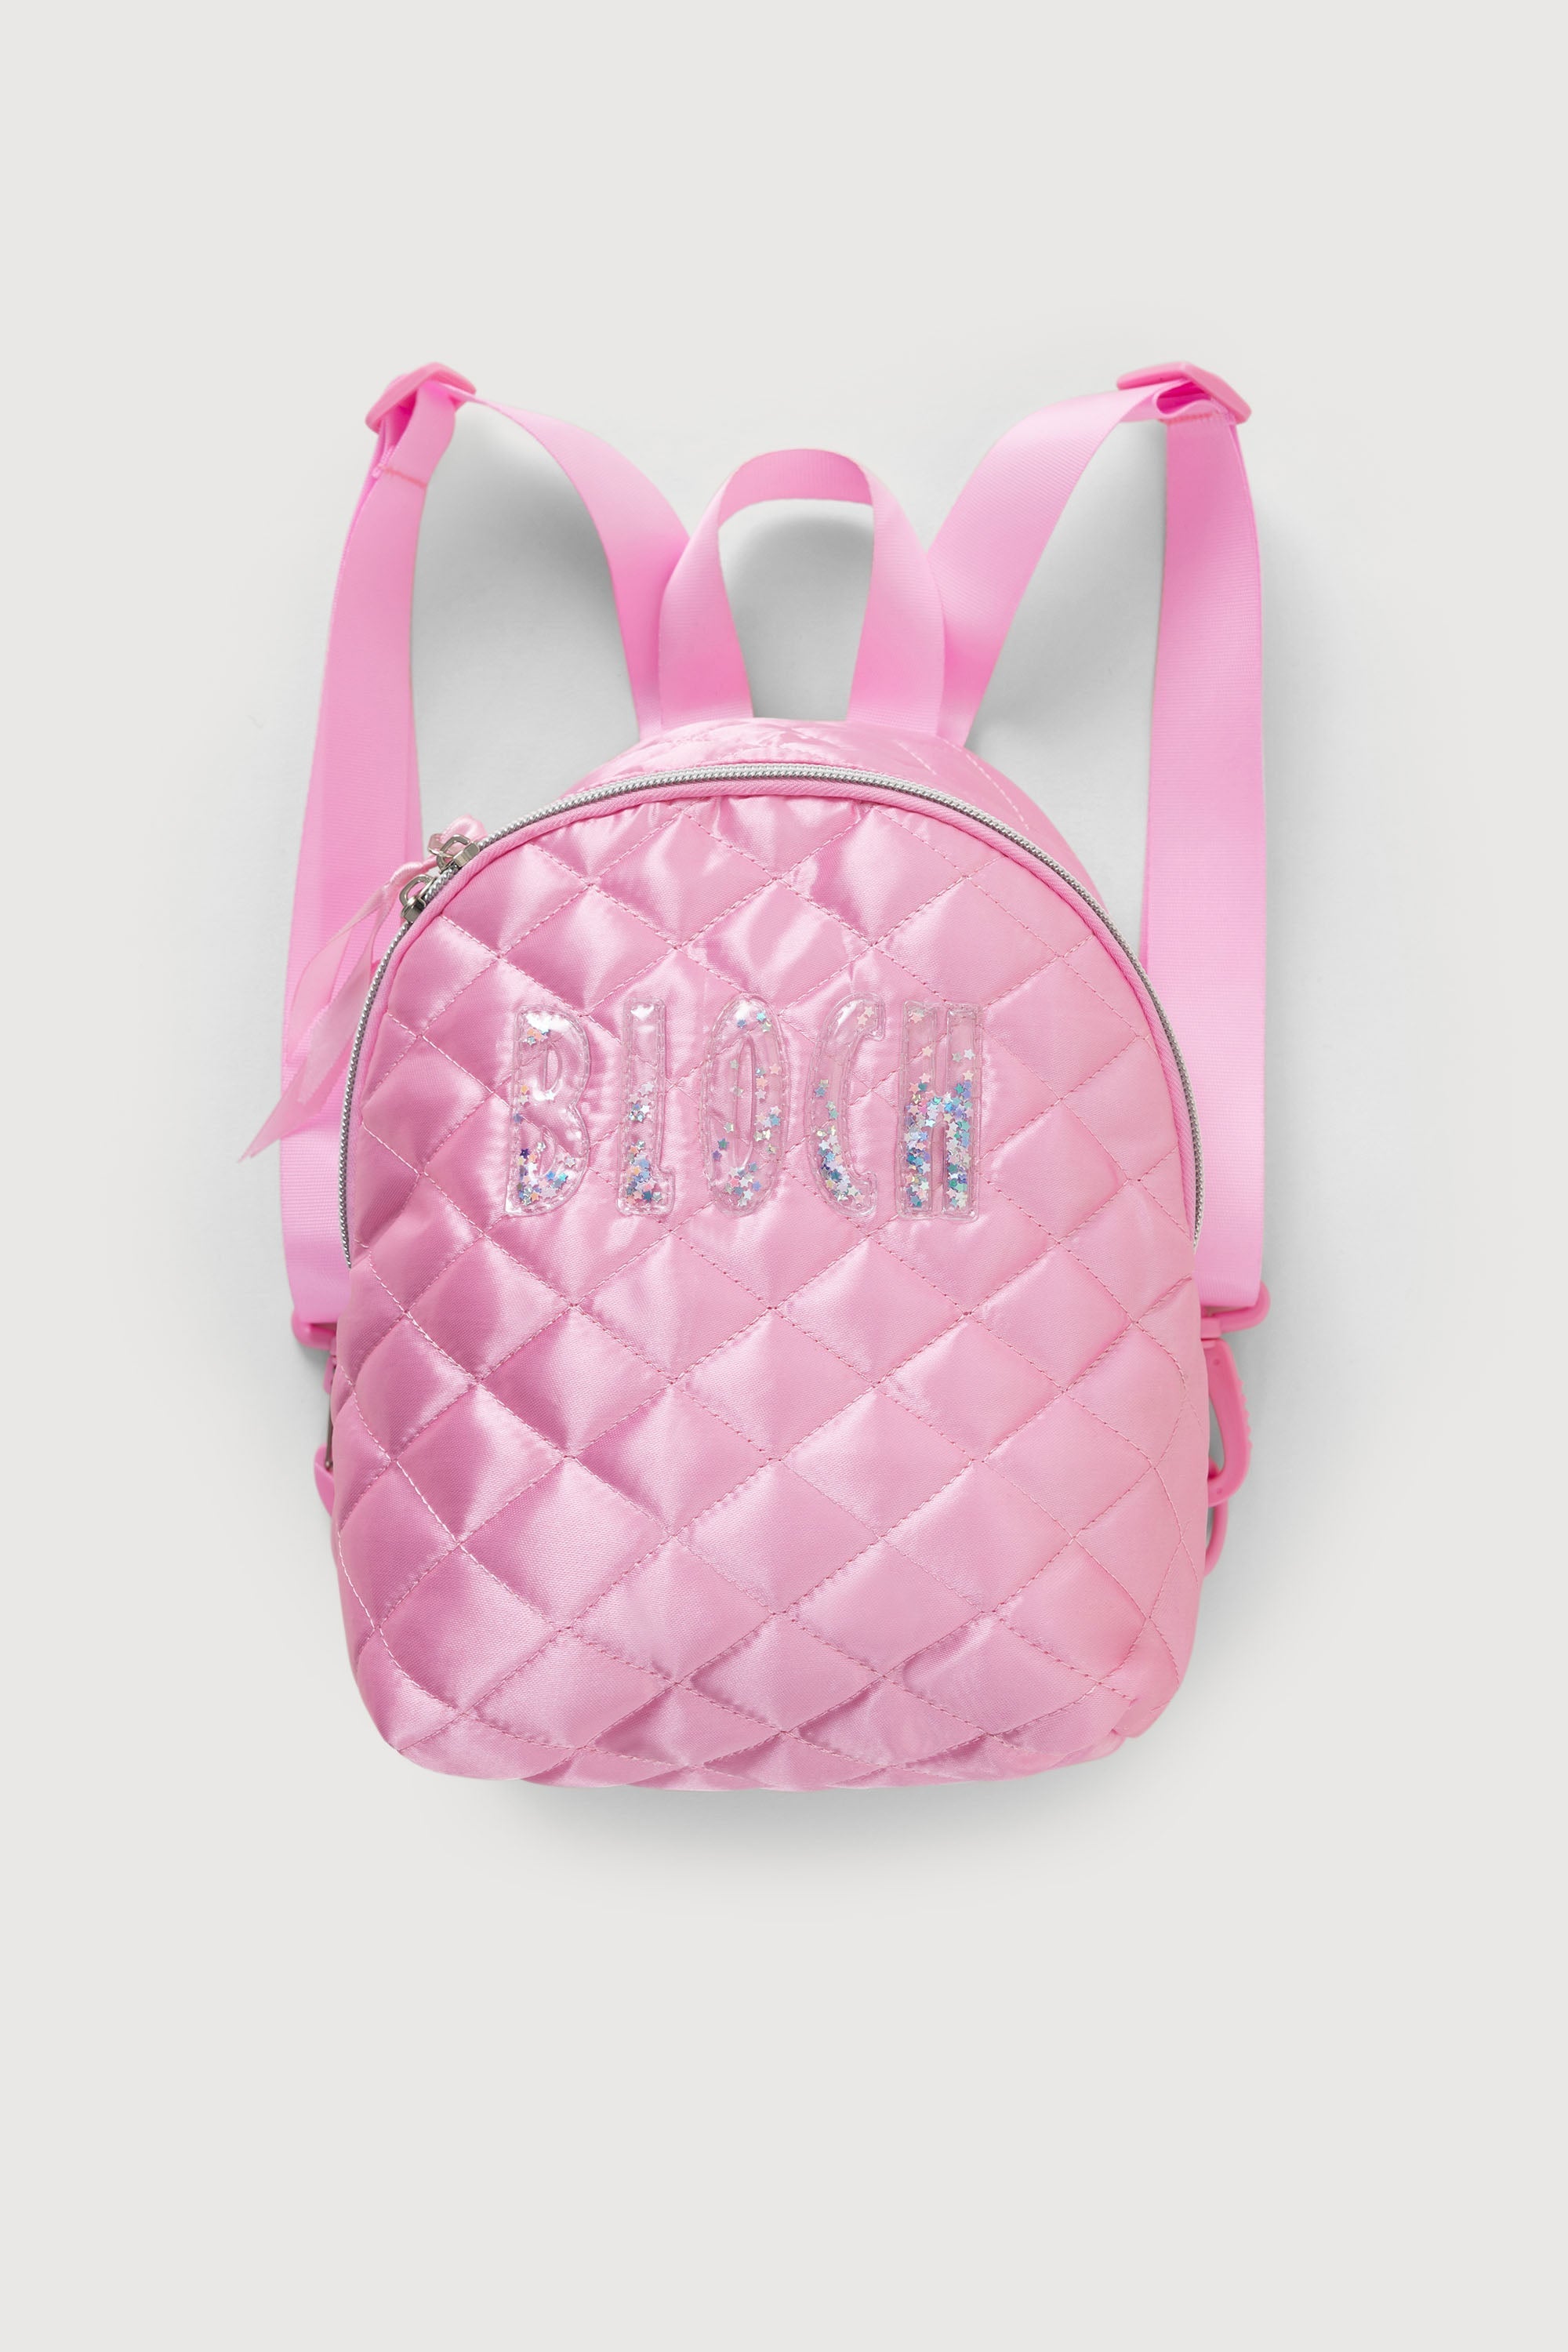 Bloch Primary Satin Backpack, Candy Pink Satin